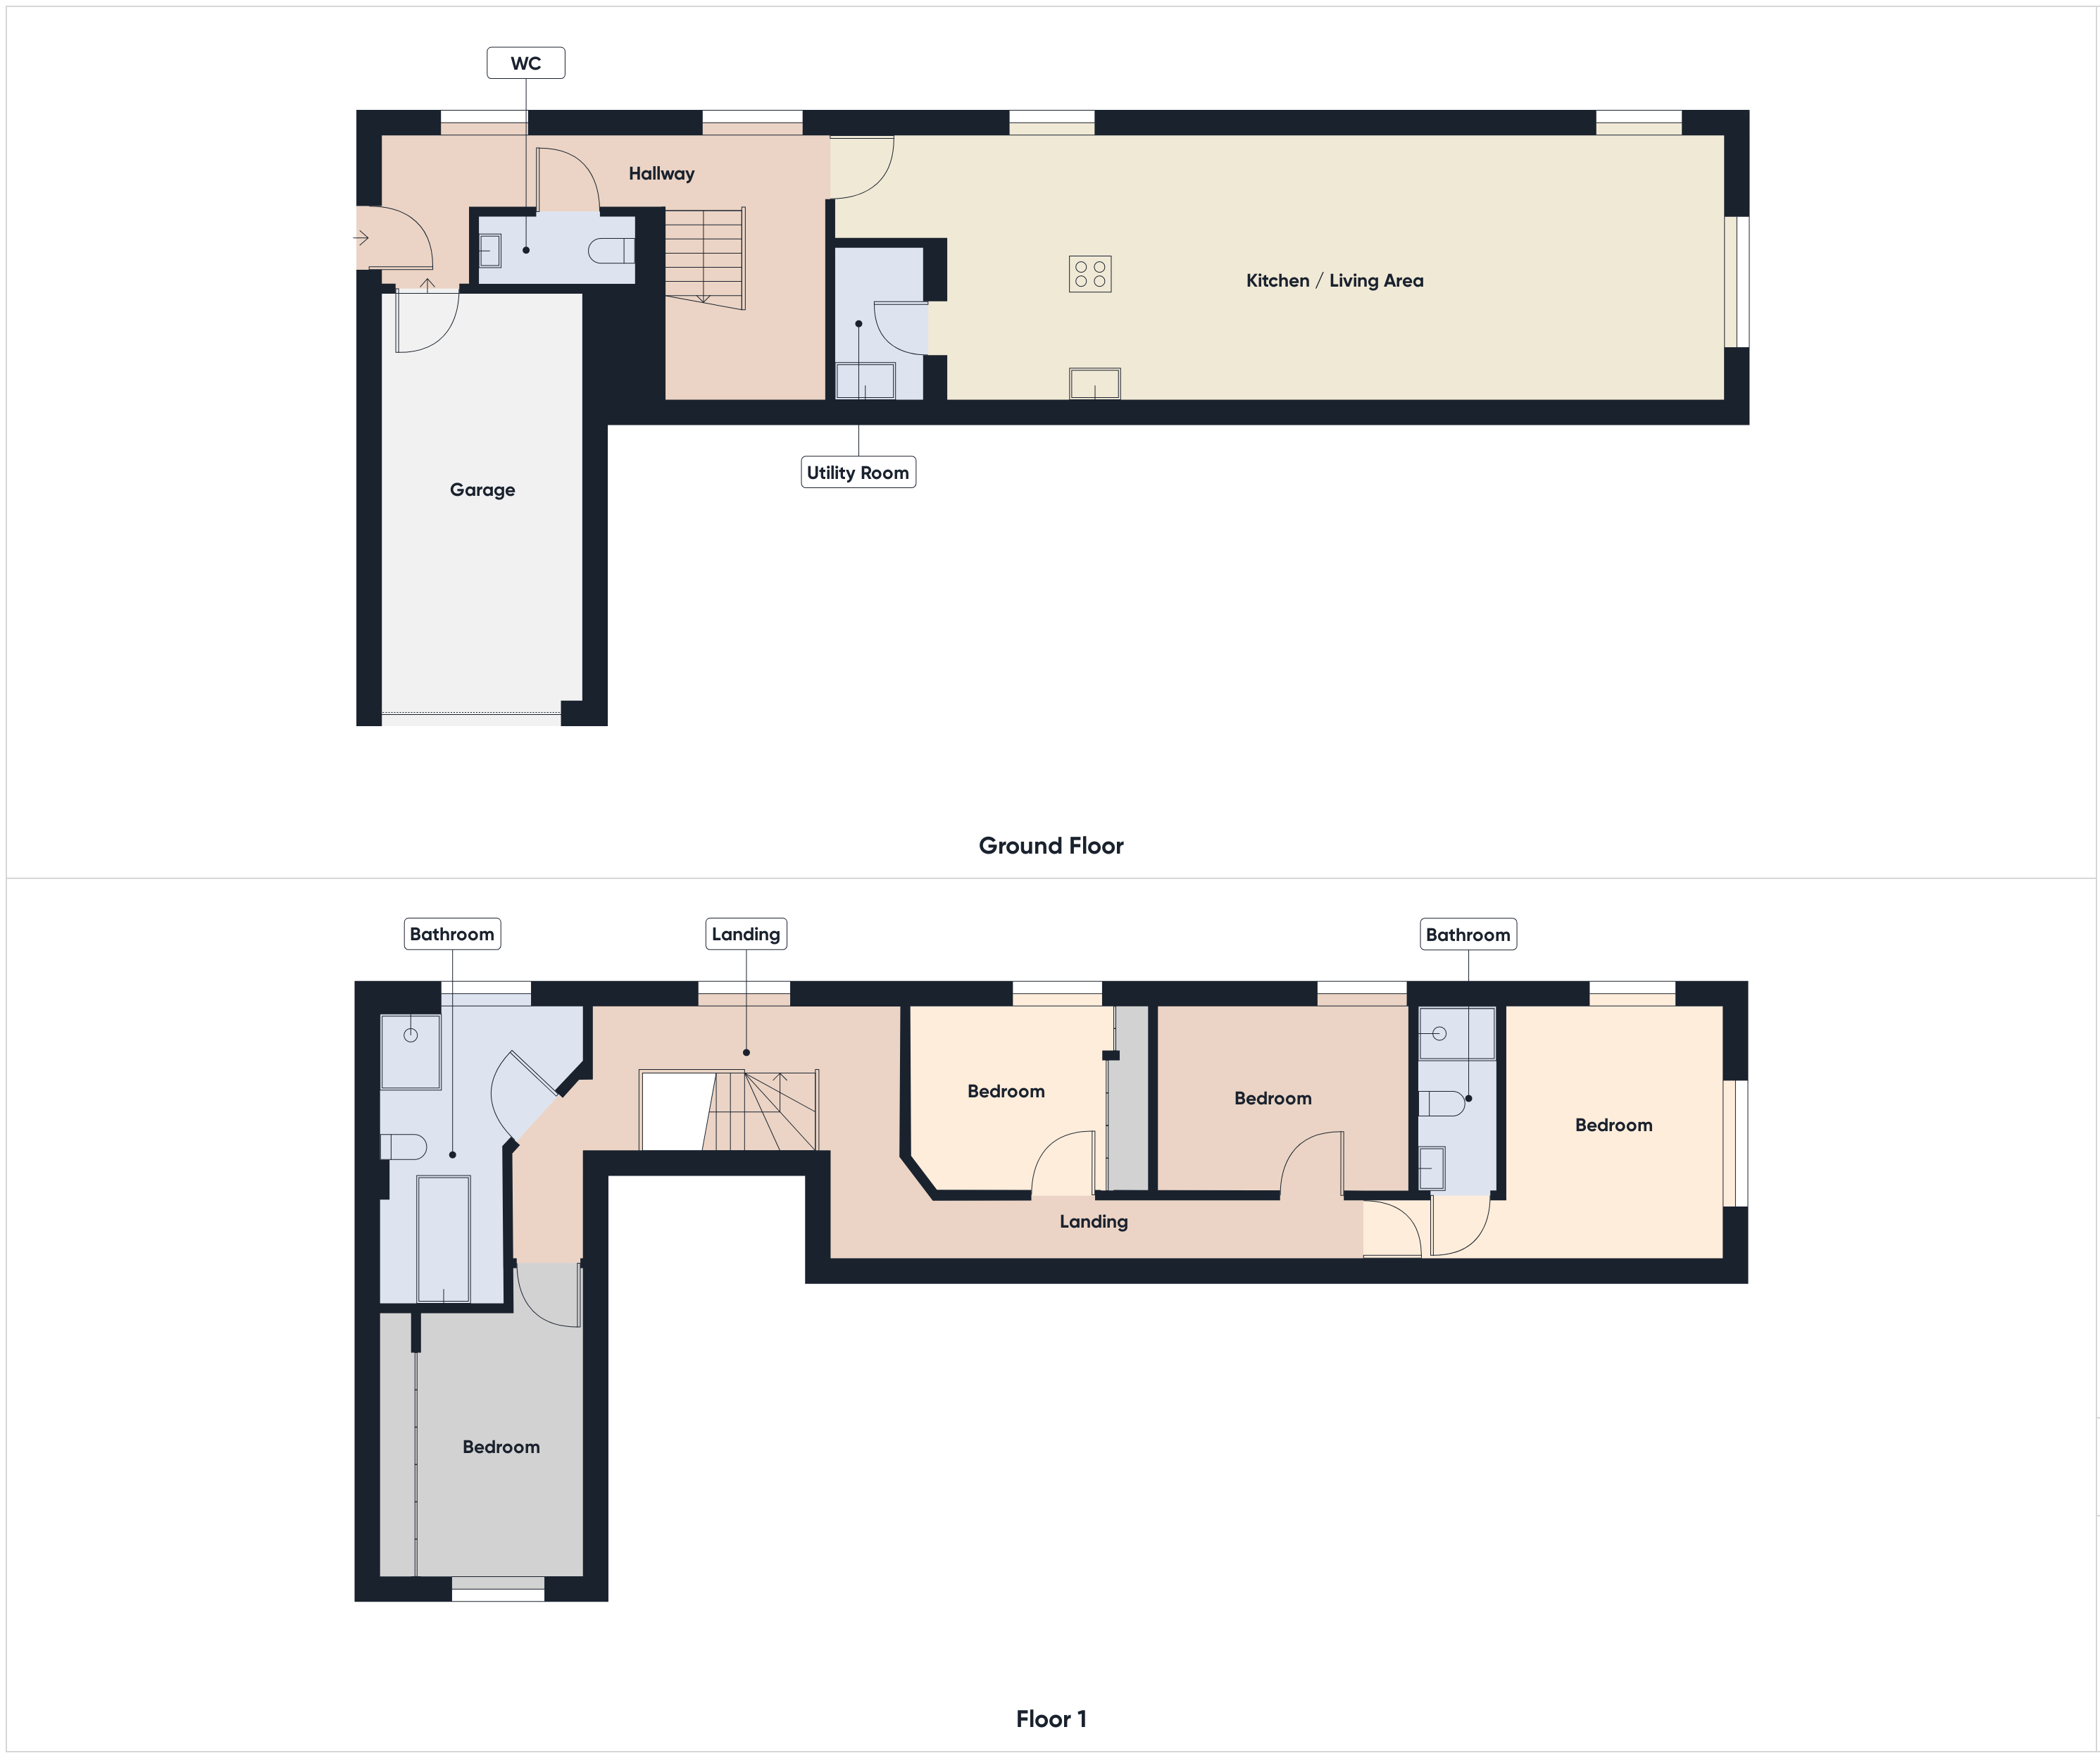 hitmoorviewfloorplan version 3 | Home of the week from The Property Centre - Mobley, Berkeley